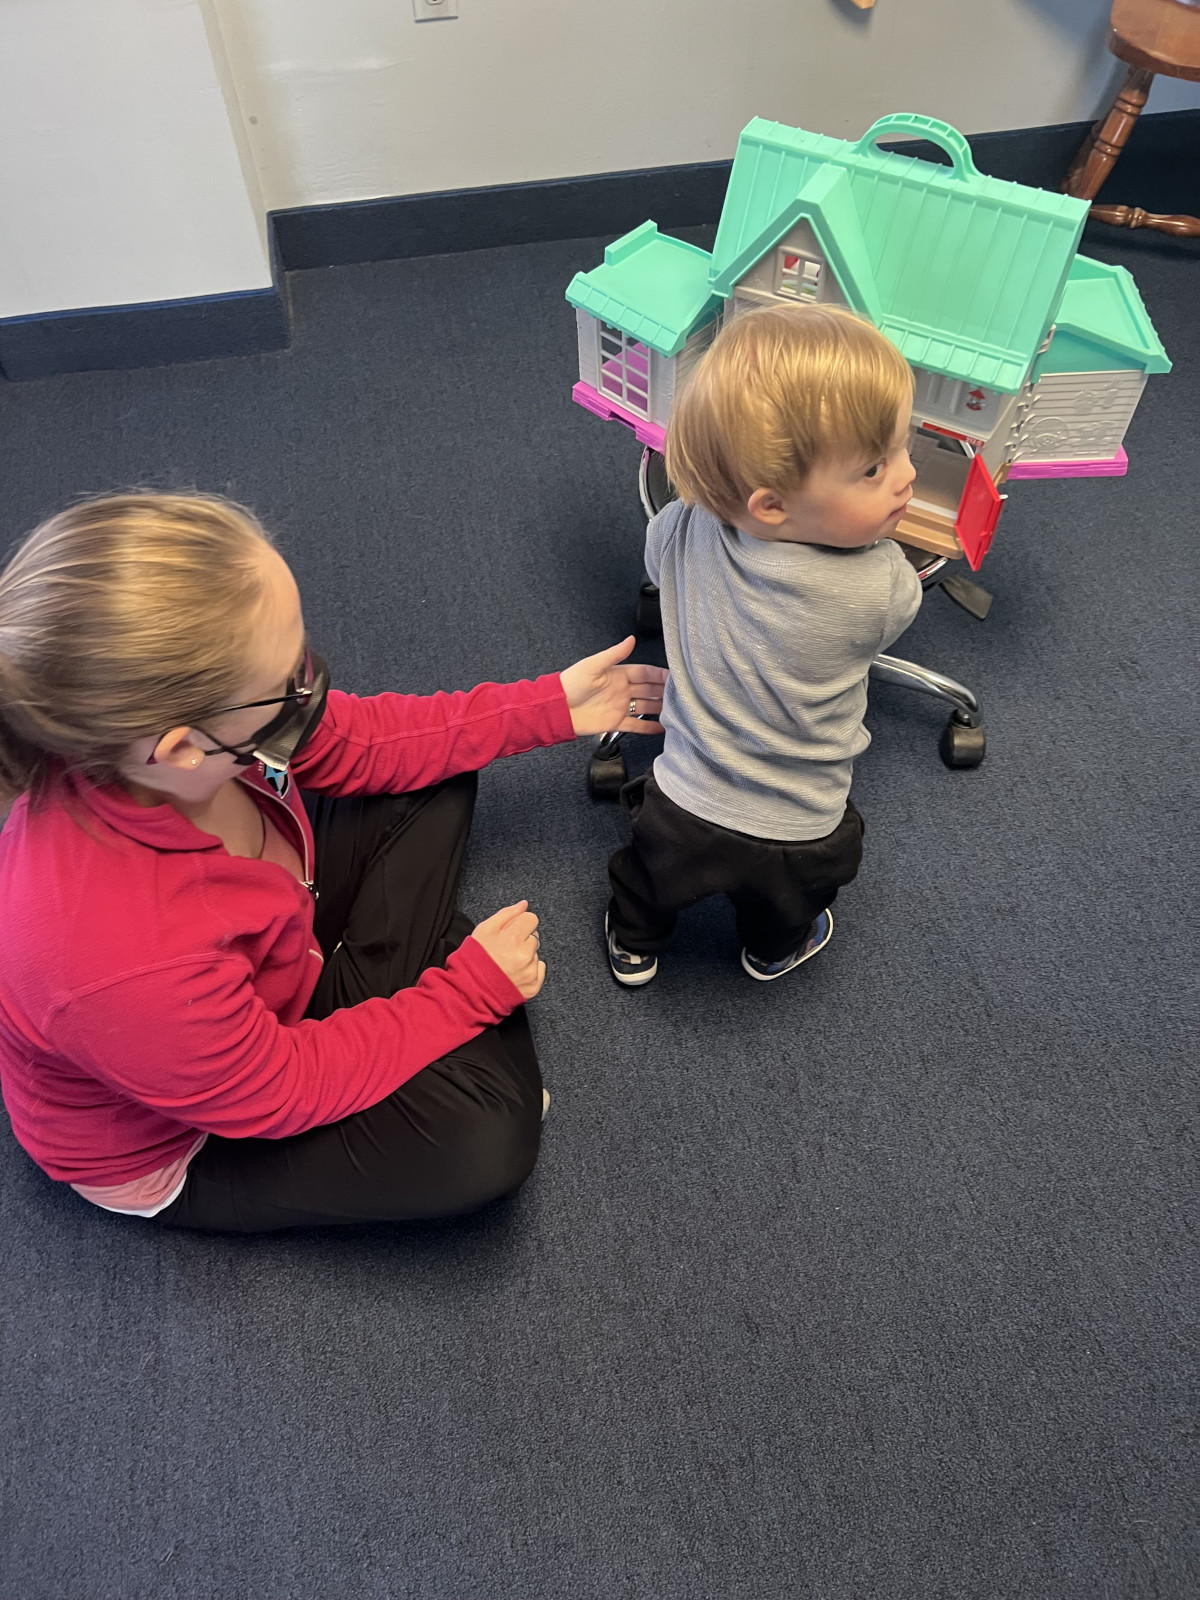 a small boy stands holding on to a doll house while a therapist prompts him